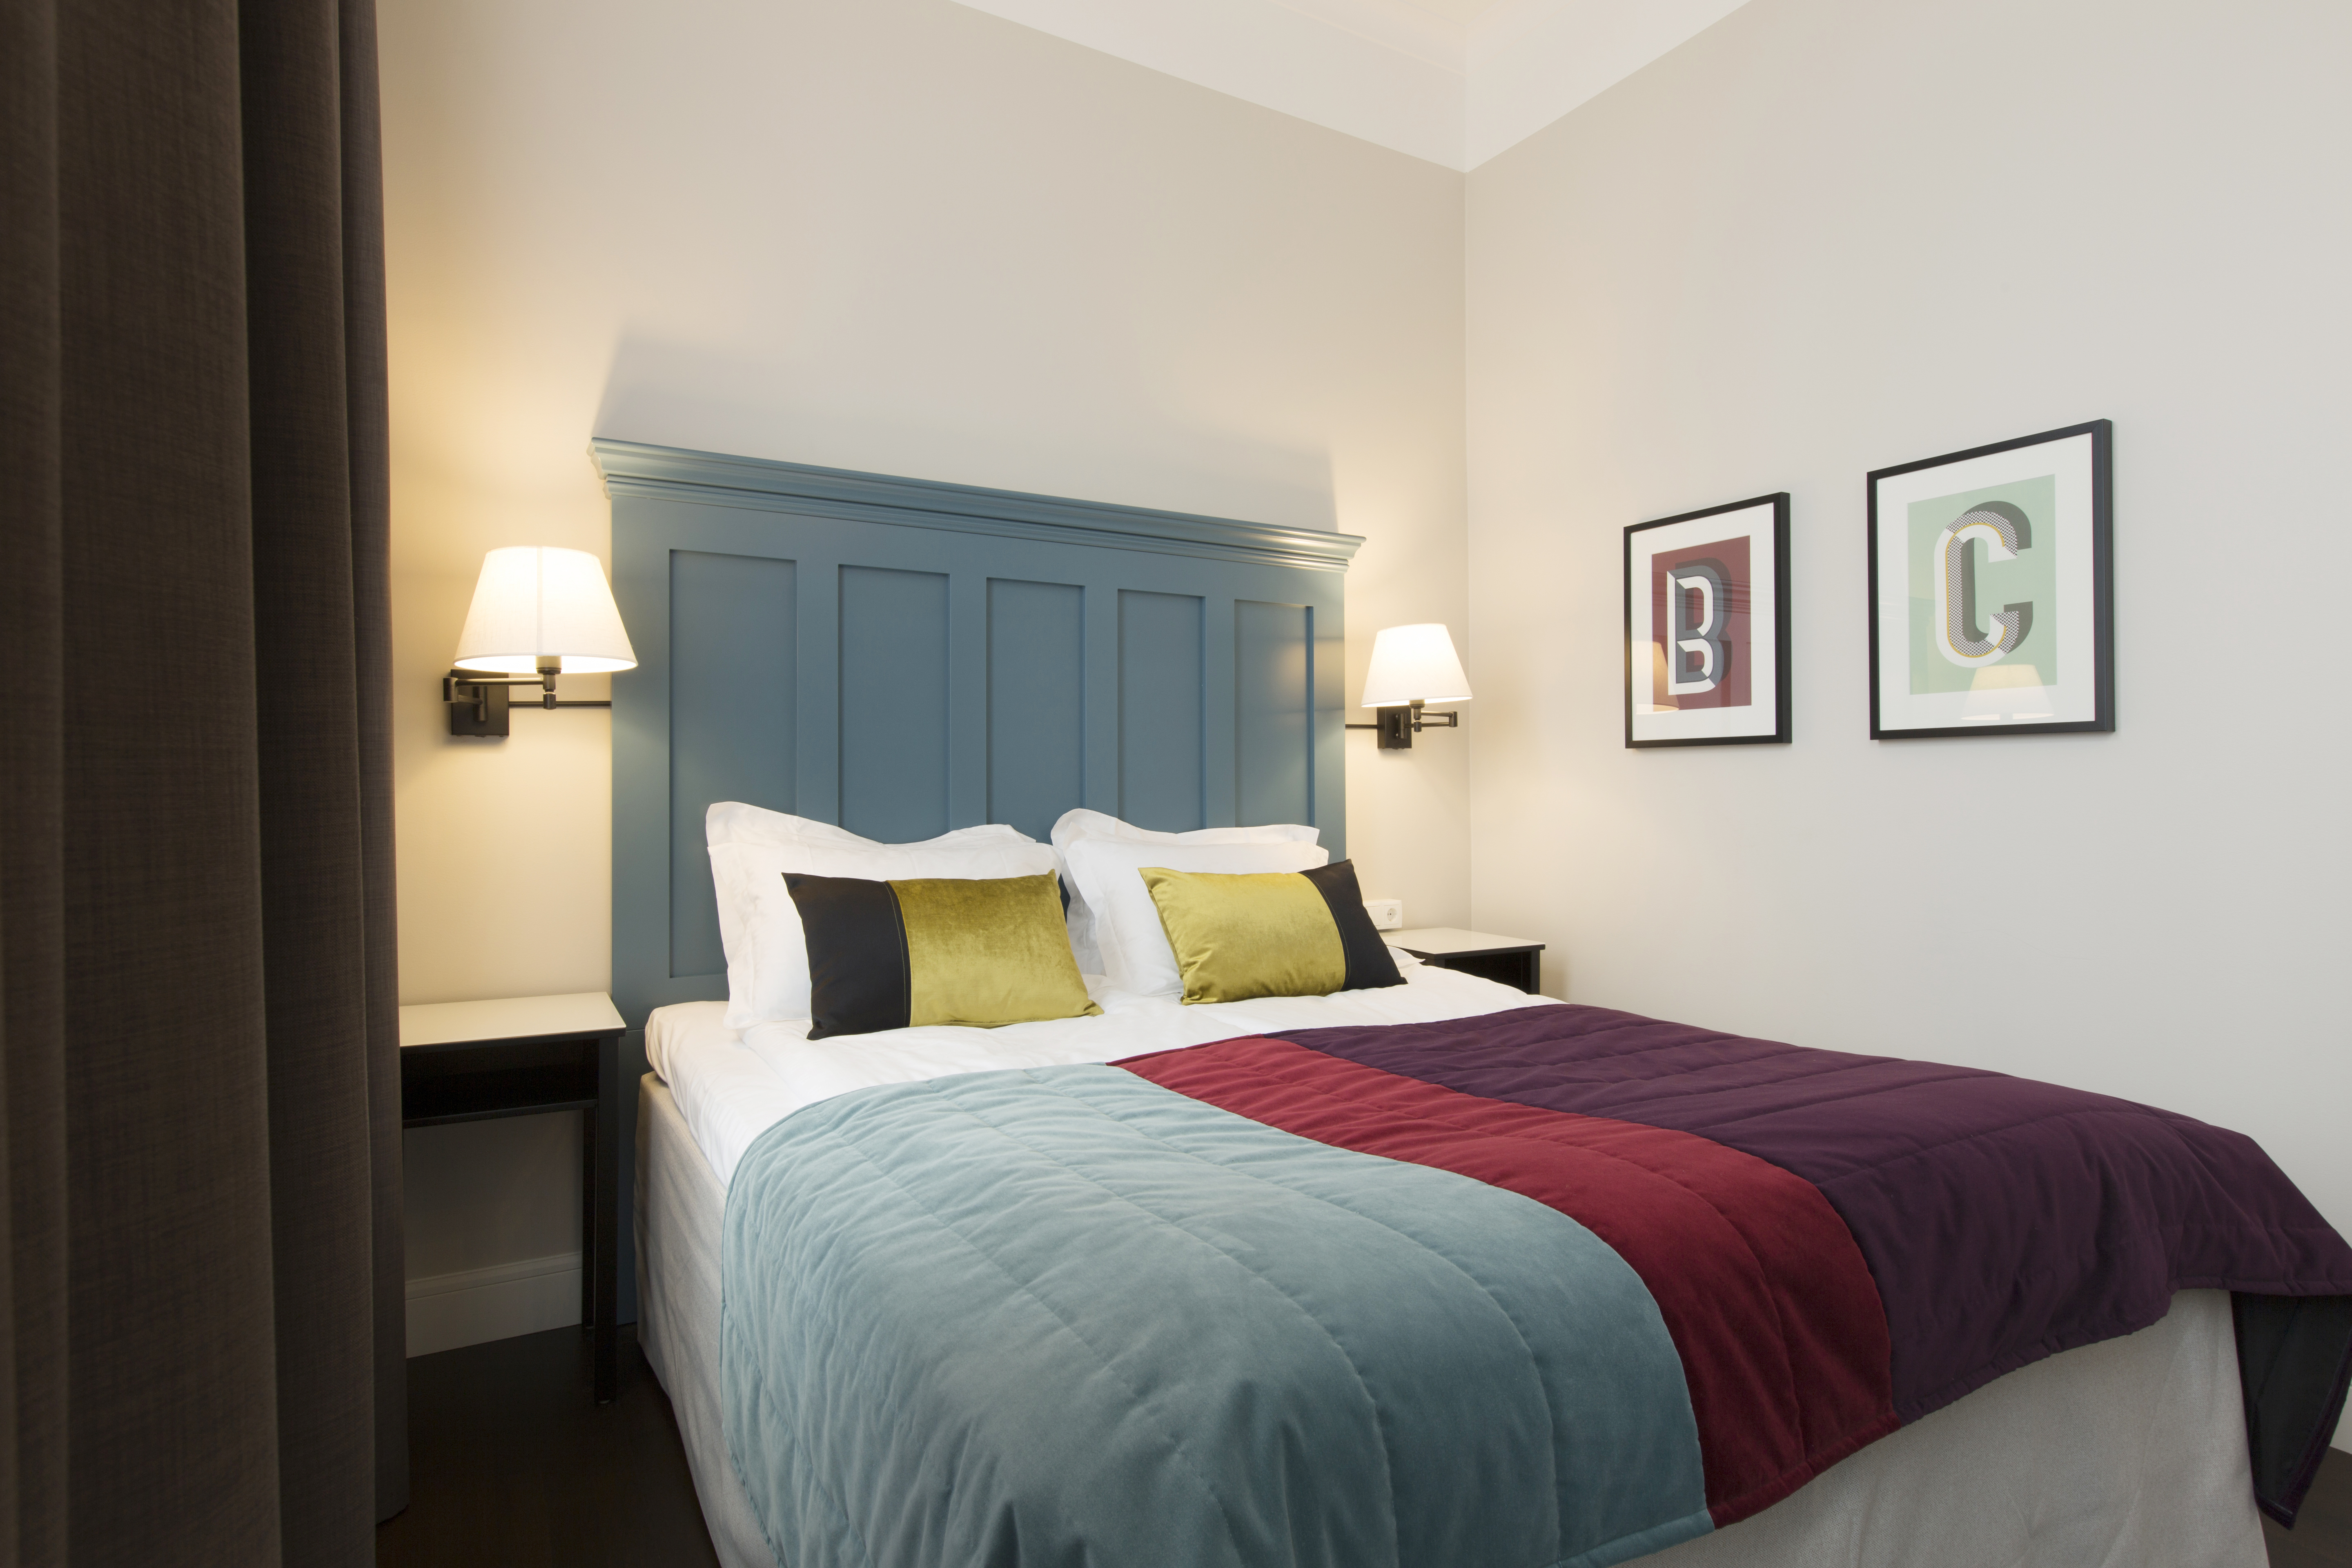 Bright hotel room with bed, large blue headboard and bedside tables